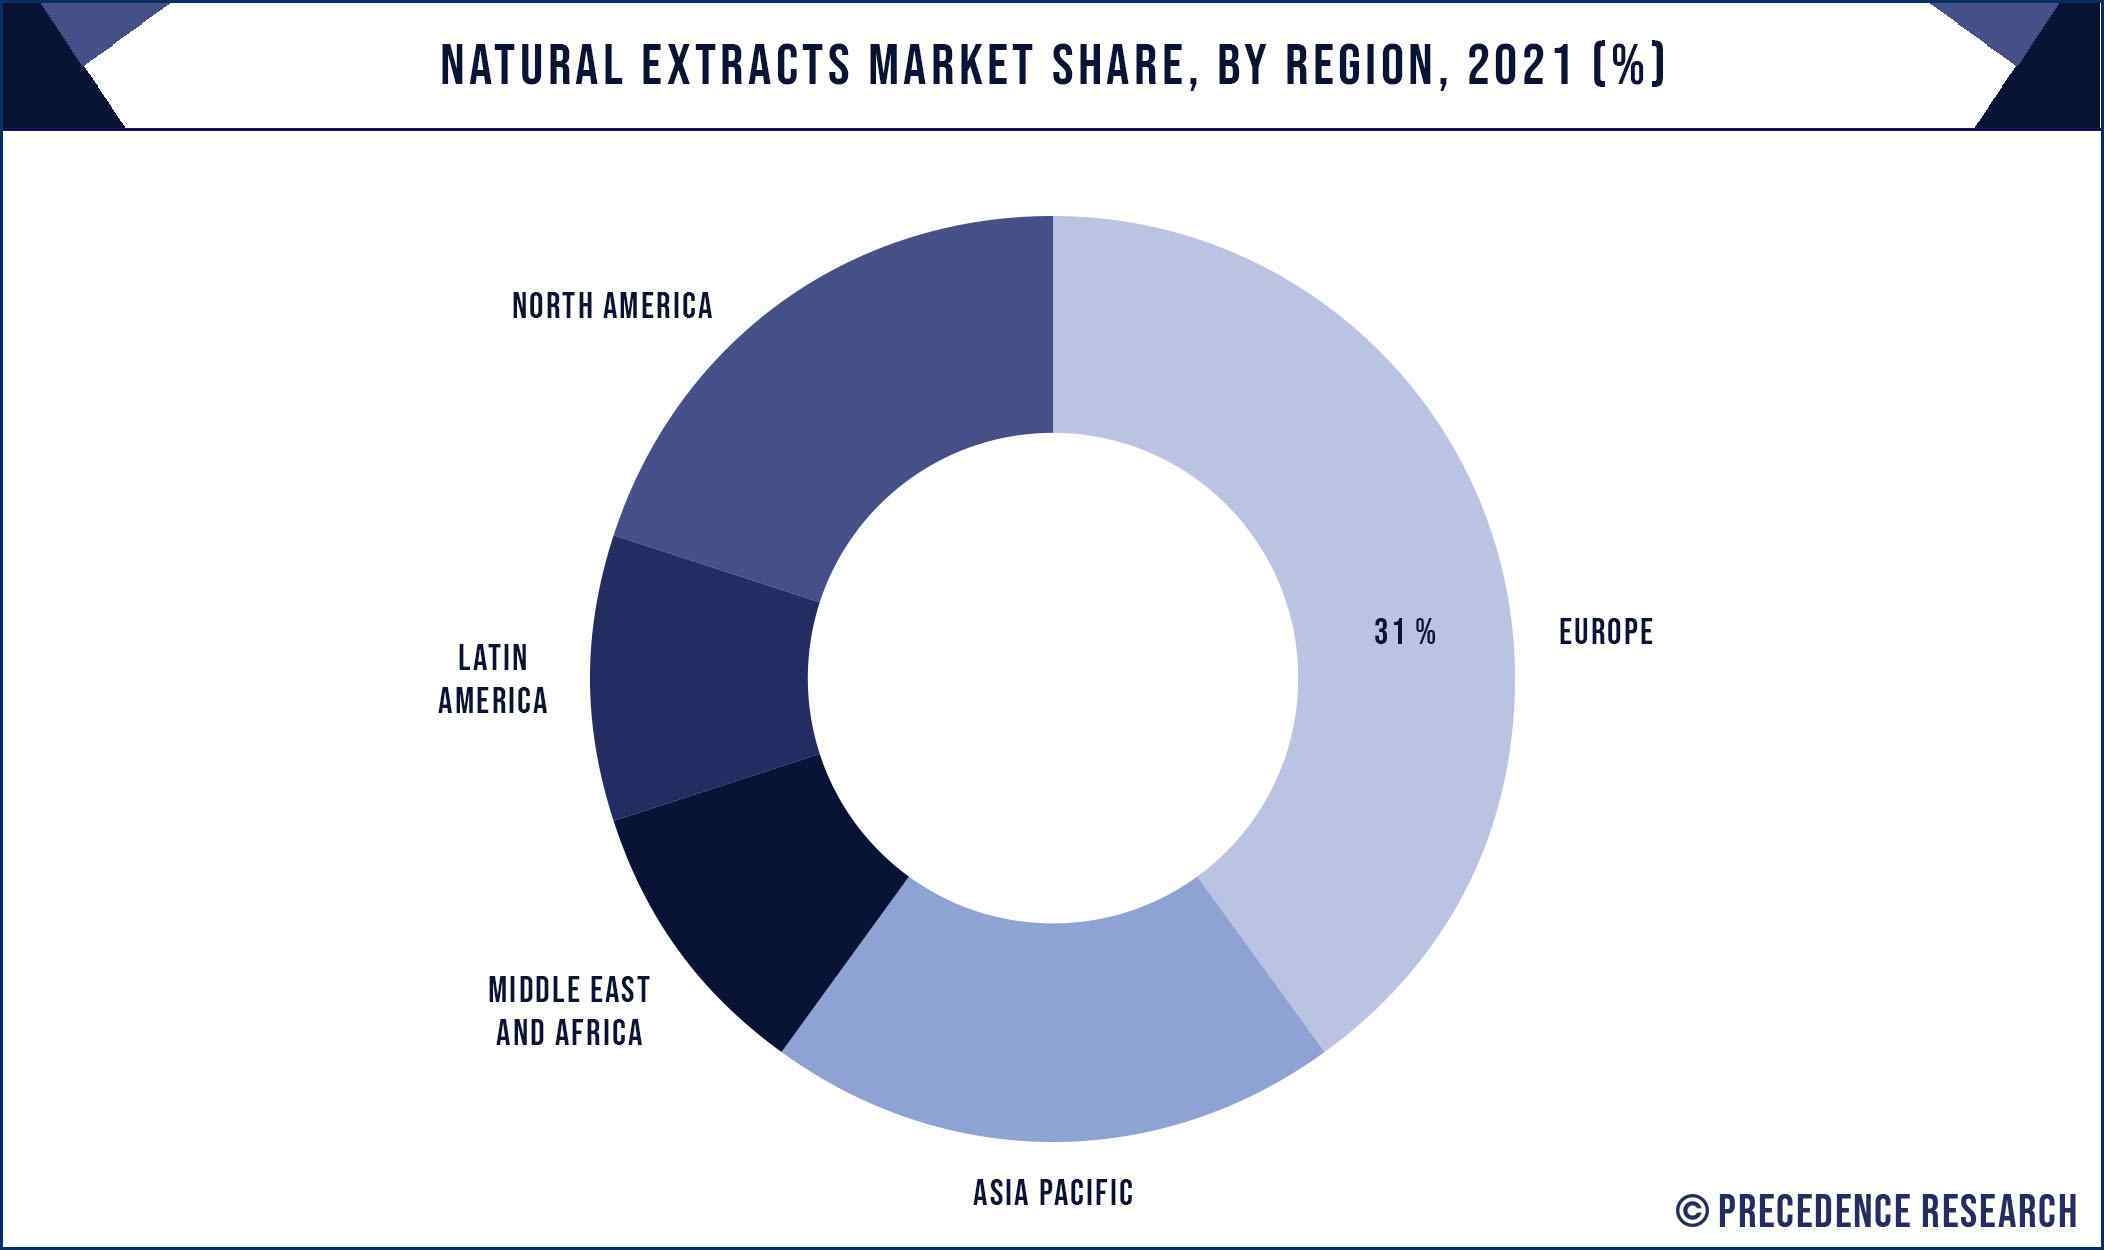 Natural Extracts Market Share, By Region, 2021 (%)